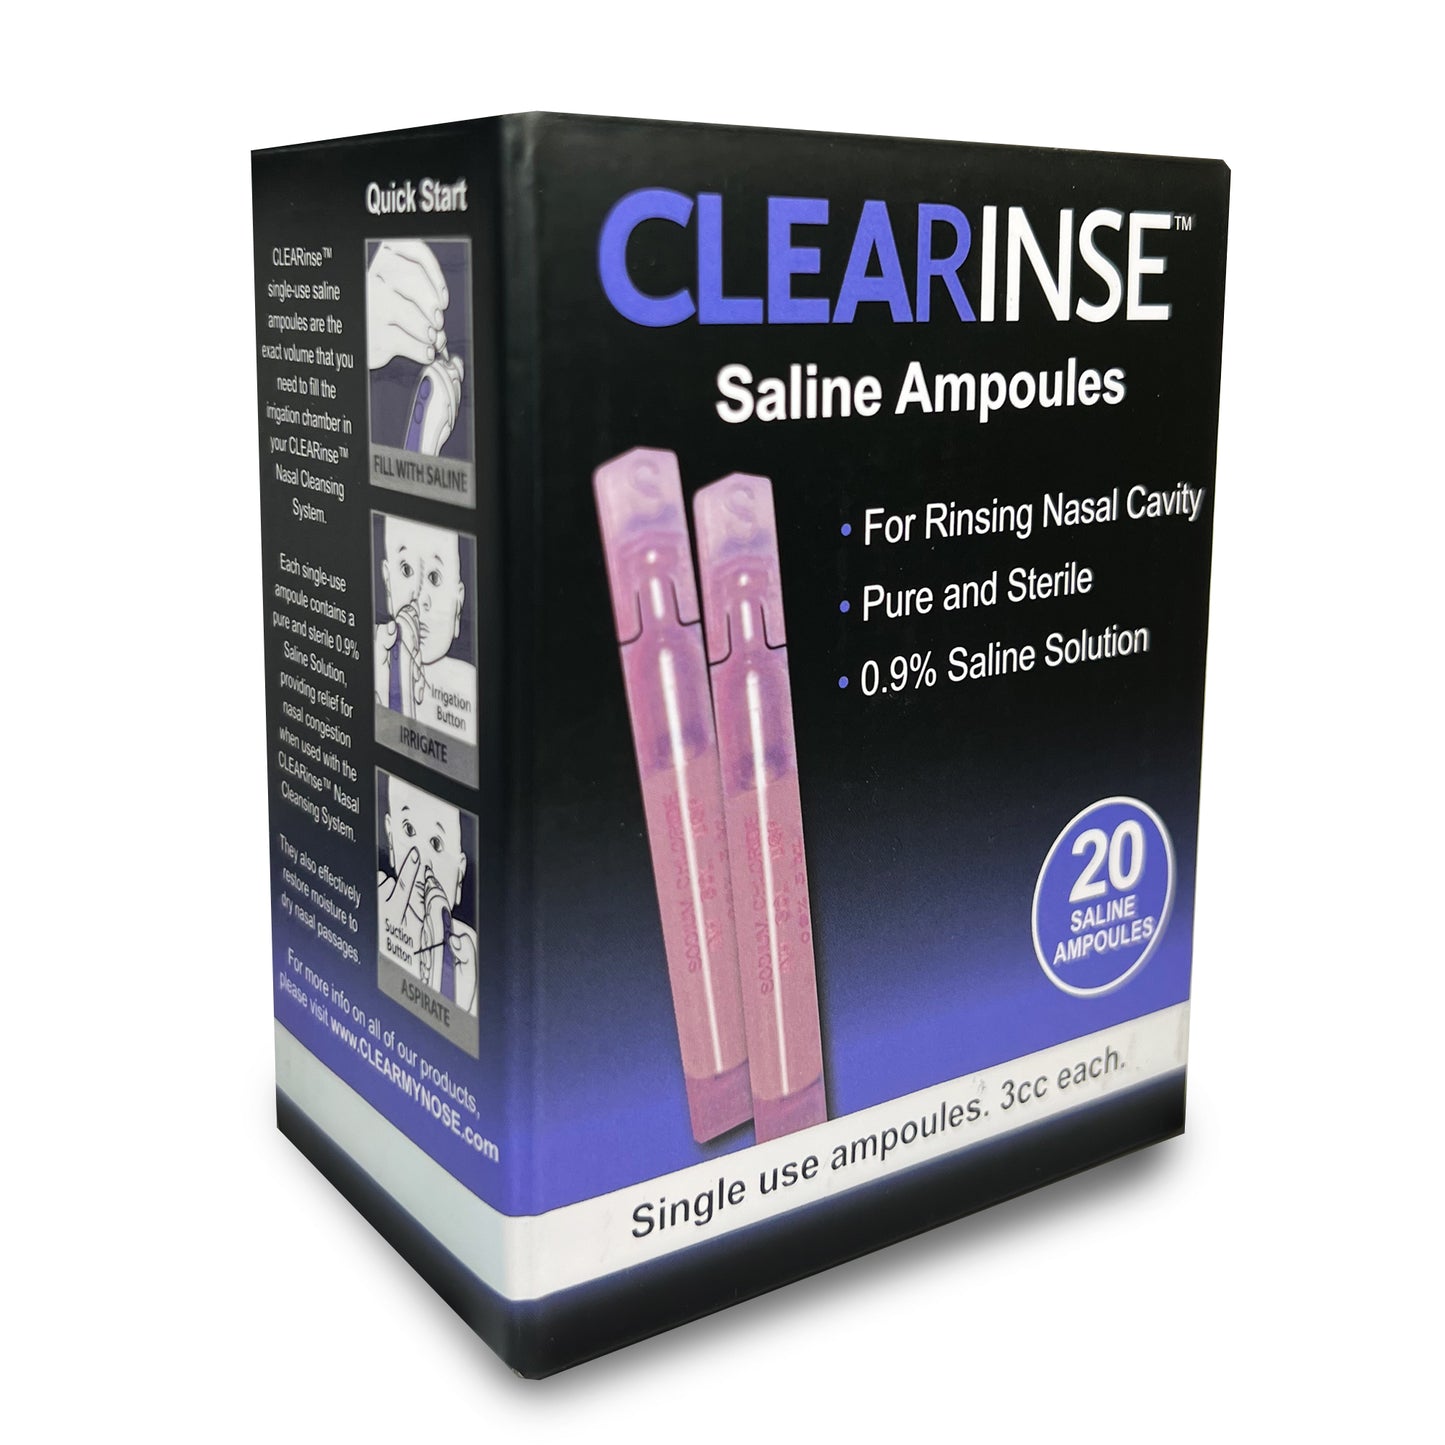 CLEARinse Saline Solution – 20 Count Box of Ampoules